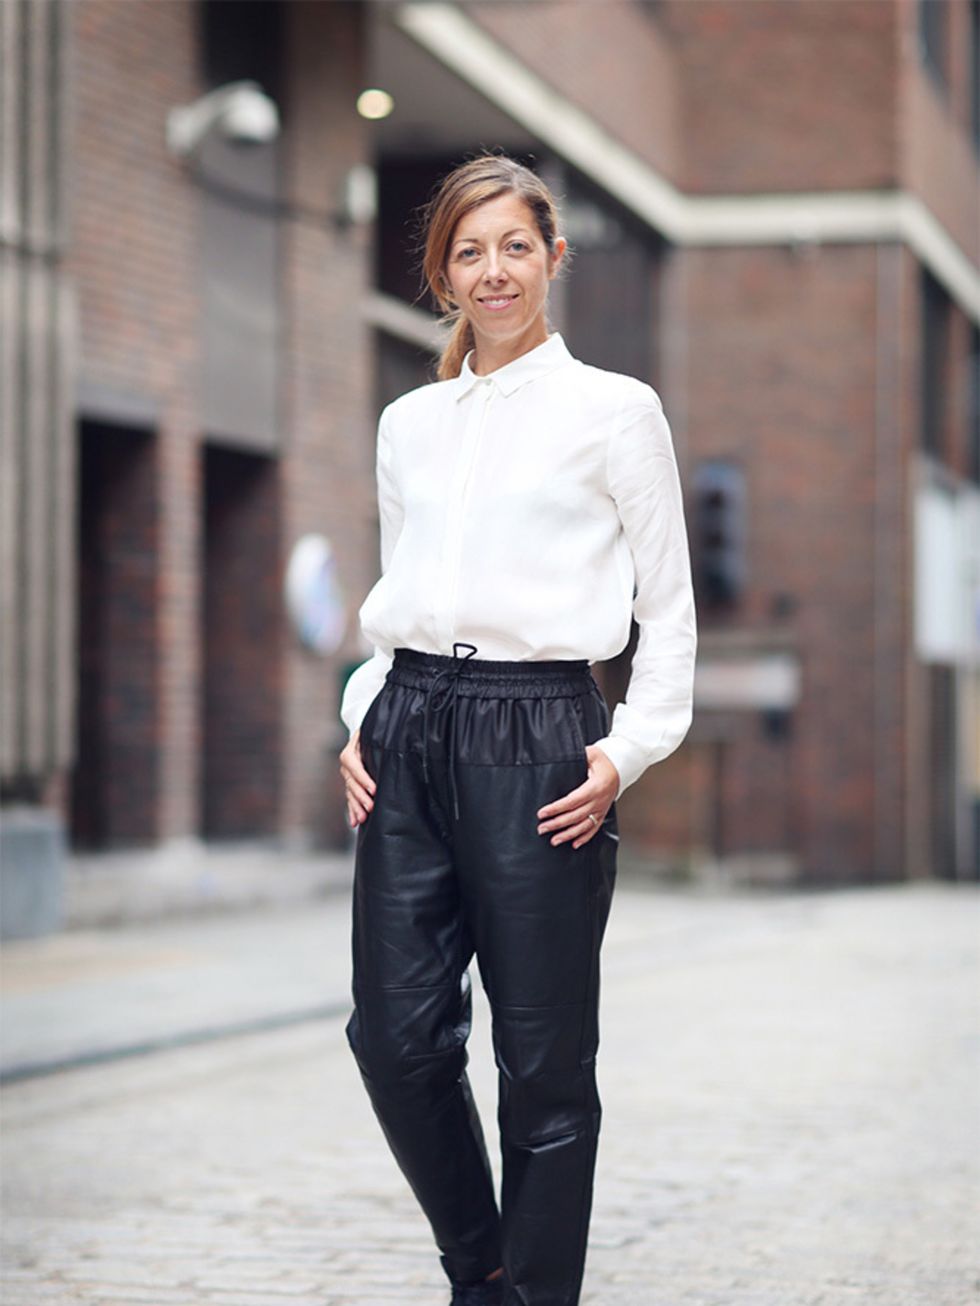 <p>Kirsty Dale  Executive Fashion and Beauty Director</p>

<p>Alexander Wang x H&M leather trousers, £179.99</p>